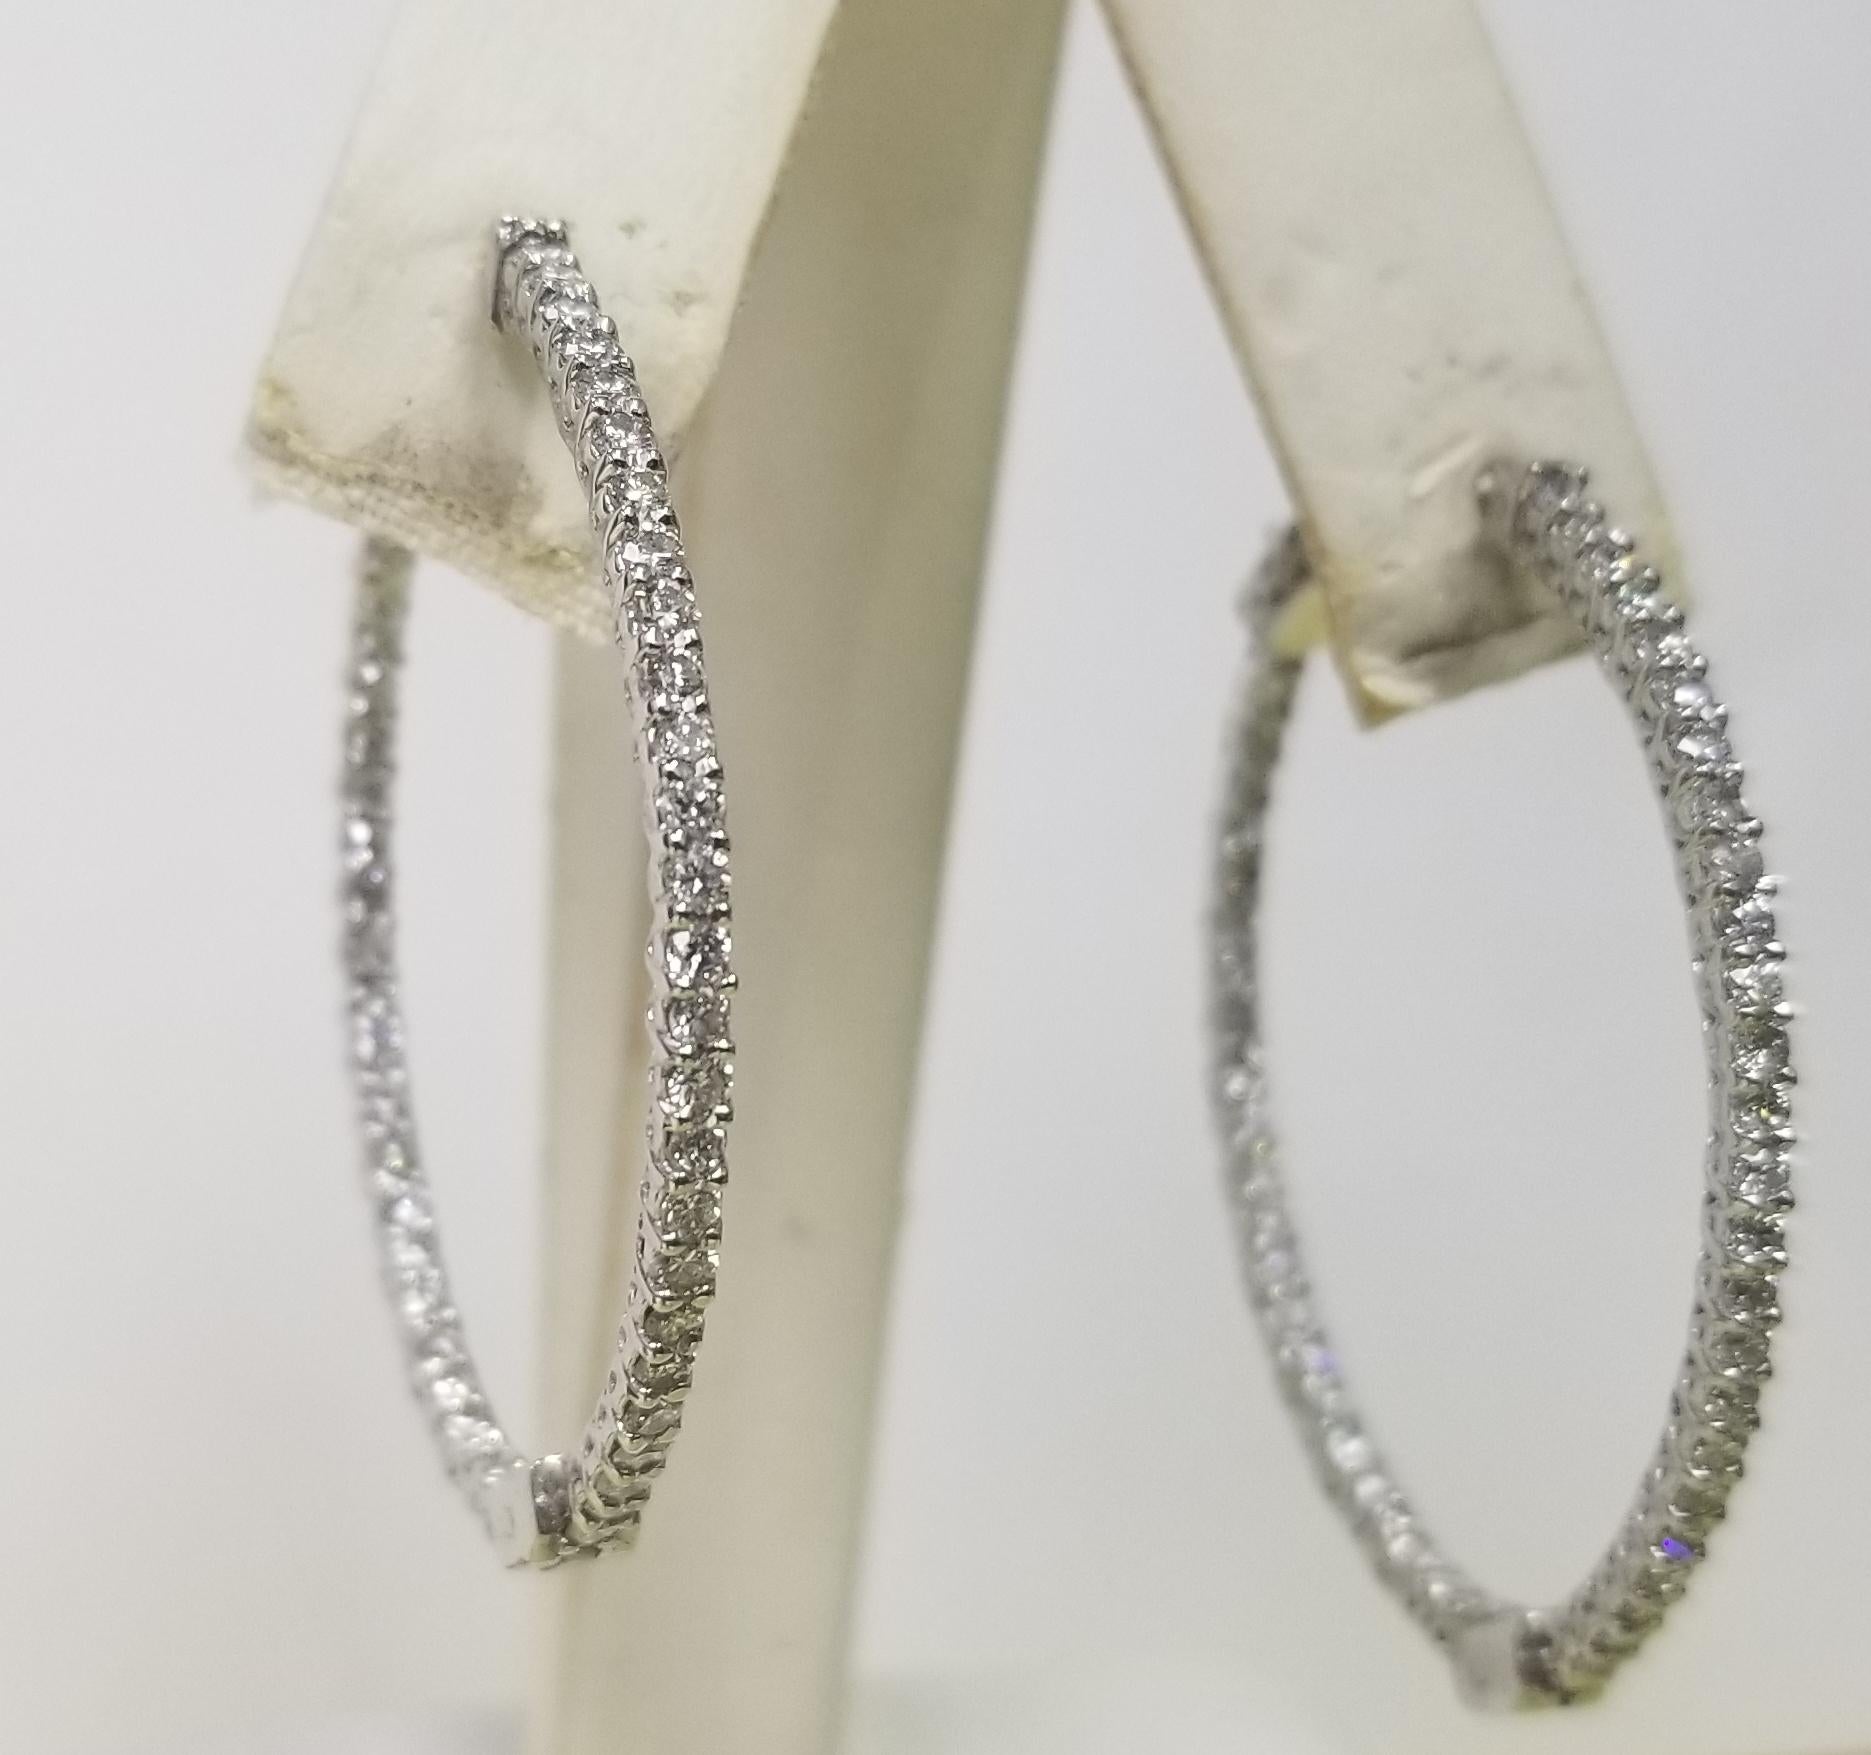 About
14k white gold large 1 1/2 inch long diamond hoop earrings
Specifications:
    main stone: 96 round Diamonds    
    carat total weight: 1.50CTW
    color: G
    clarity: VS
    metal: 14K WHITE GOLD
    type: HOOP EARRINGS
    weight: 7.50GRS 